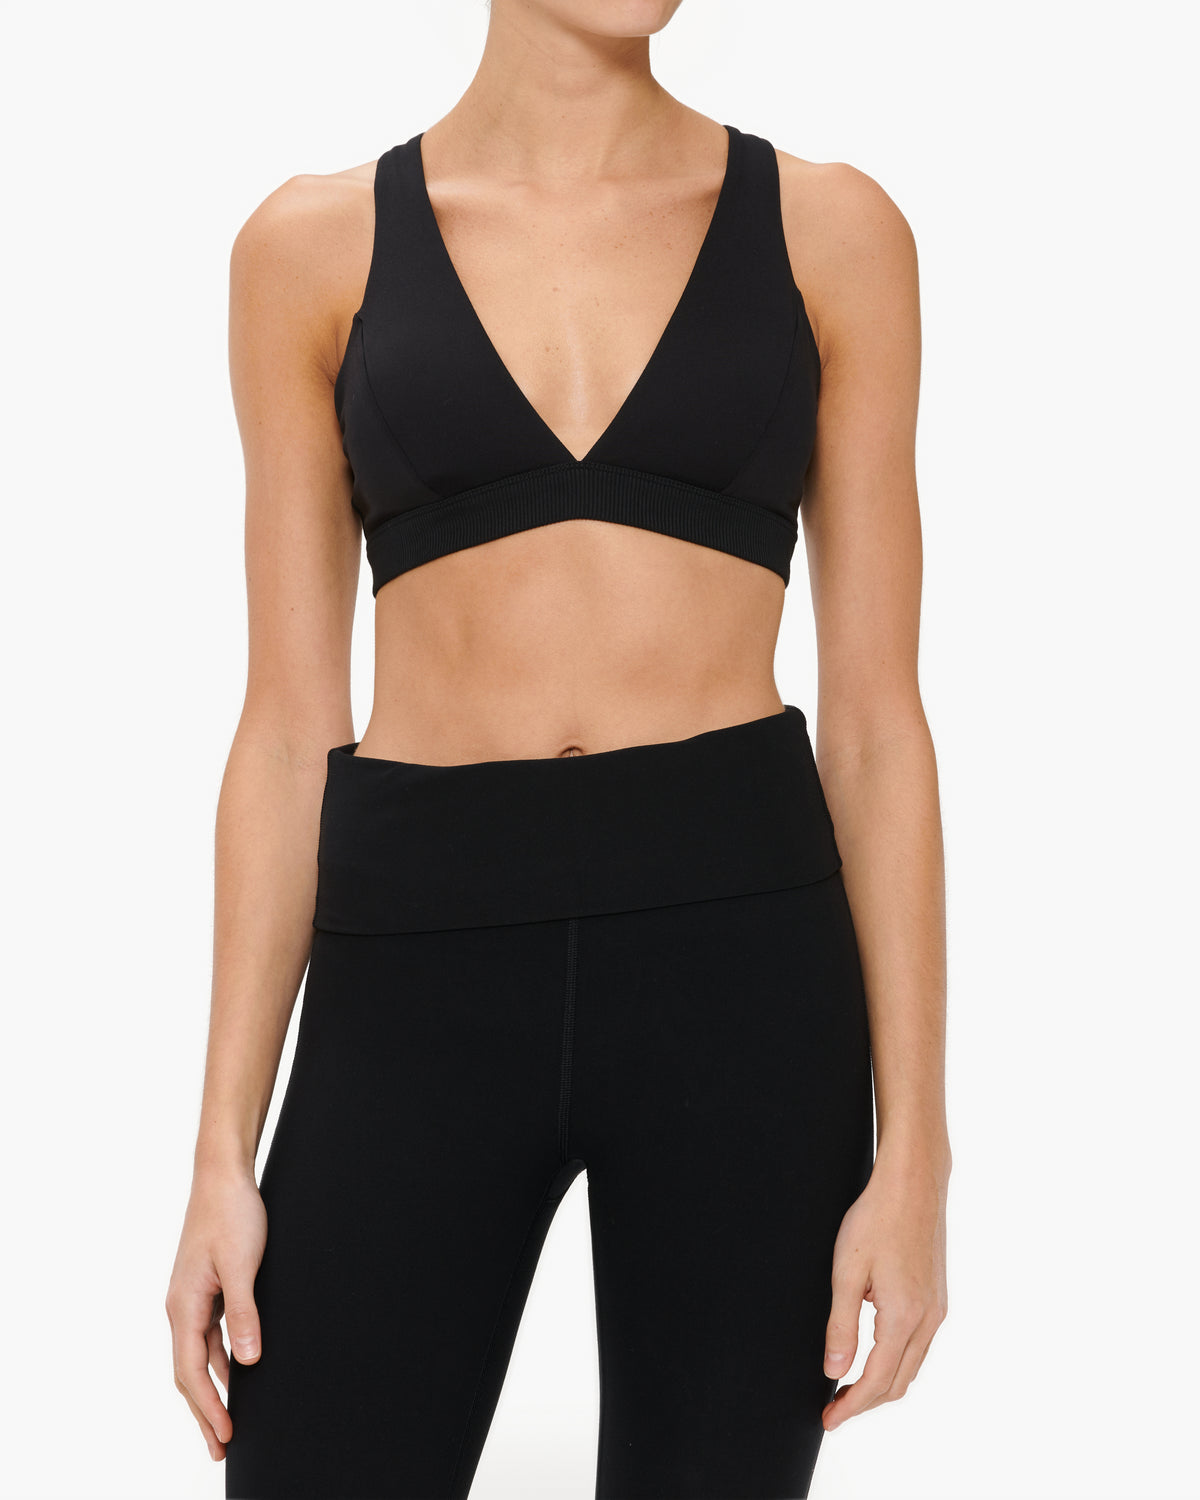 The Show Stopper Top Black